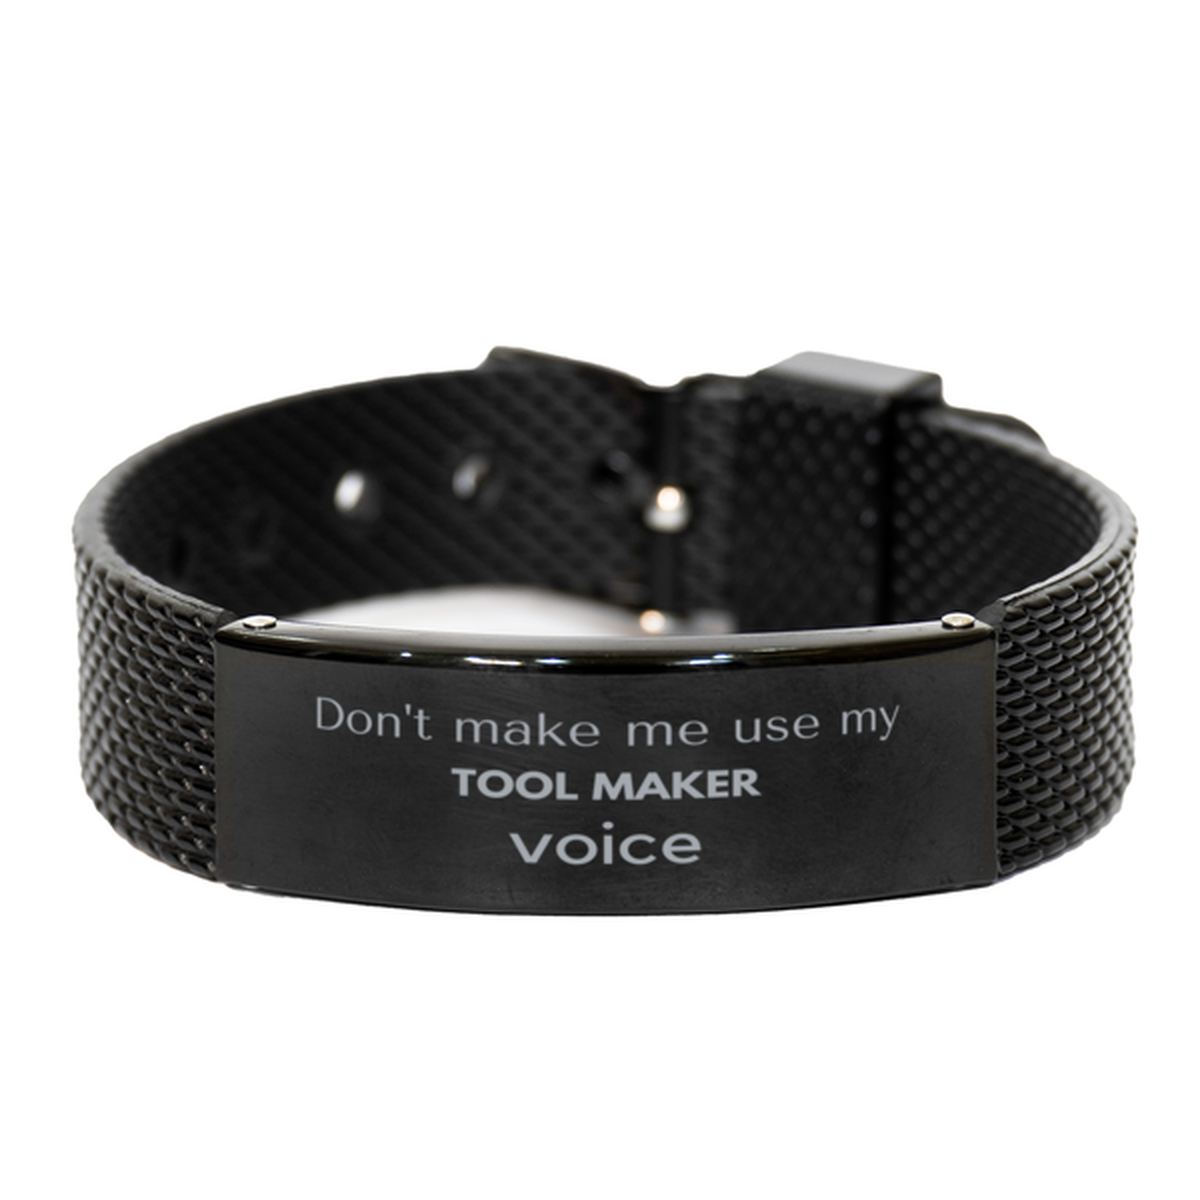 Don't make me use my Tool Maker voice, Sarcasm Tool Maker Gifts, Christmas Tool Maker Black Shark Mesh Bracelet Birthday Unique Gifts For Tool Maker Coworkers, Men, Women, Colleague, Friends